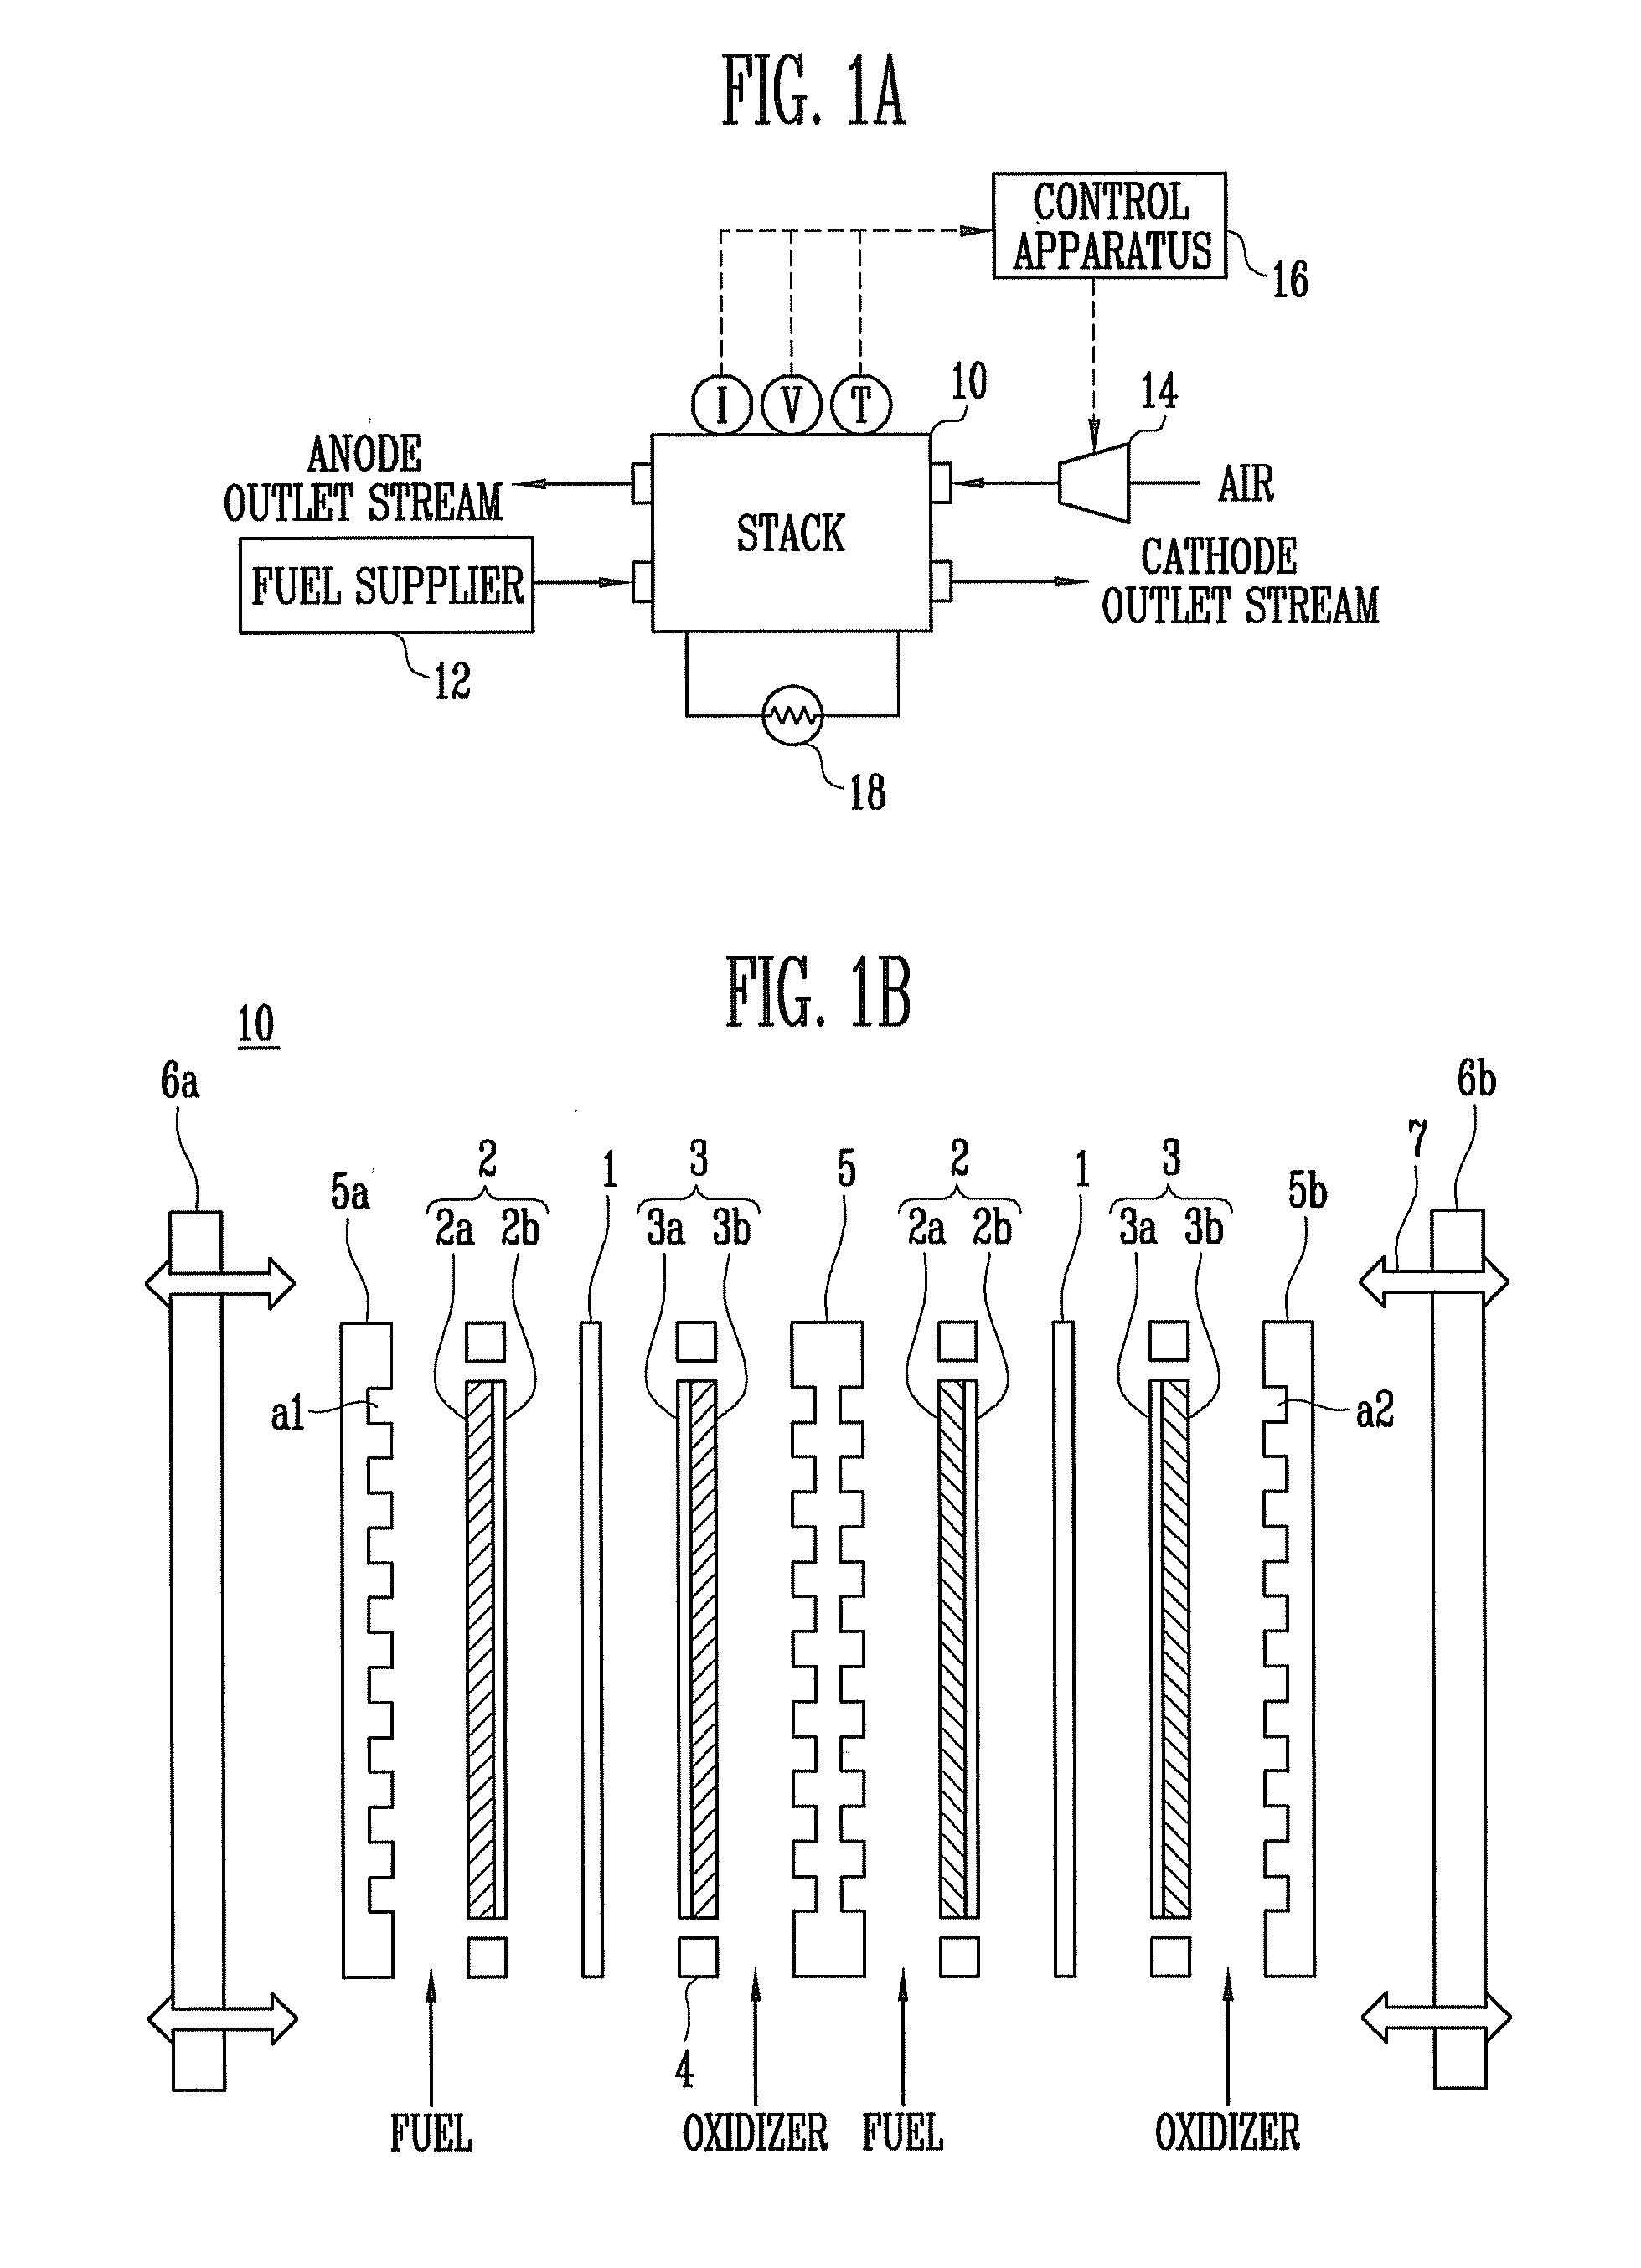 Method and apparatus to sense and control a malfunction in balance of plant for fuel cell